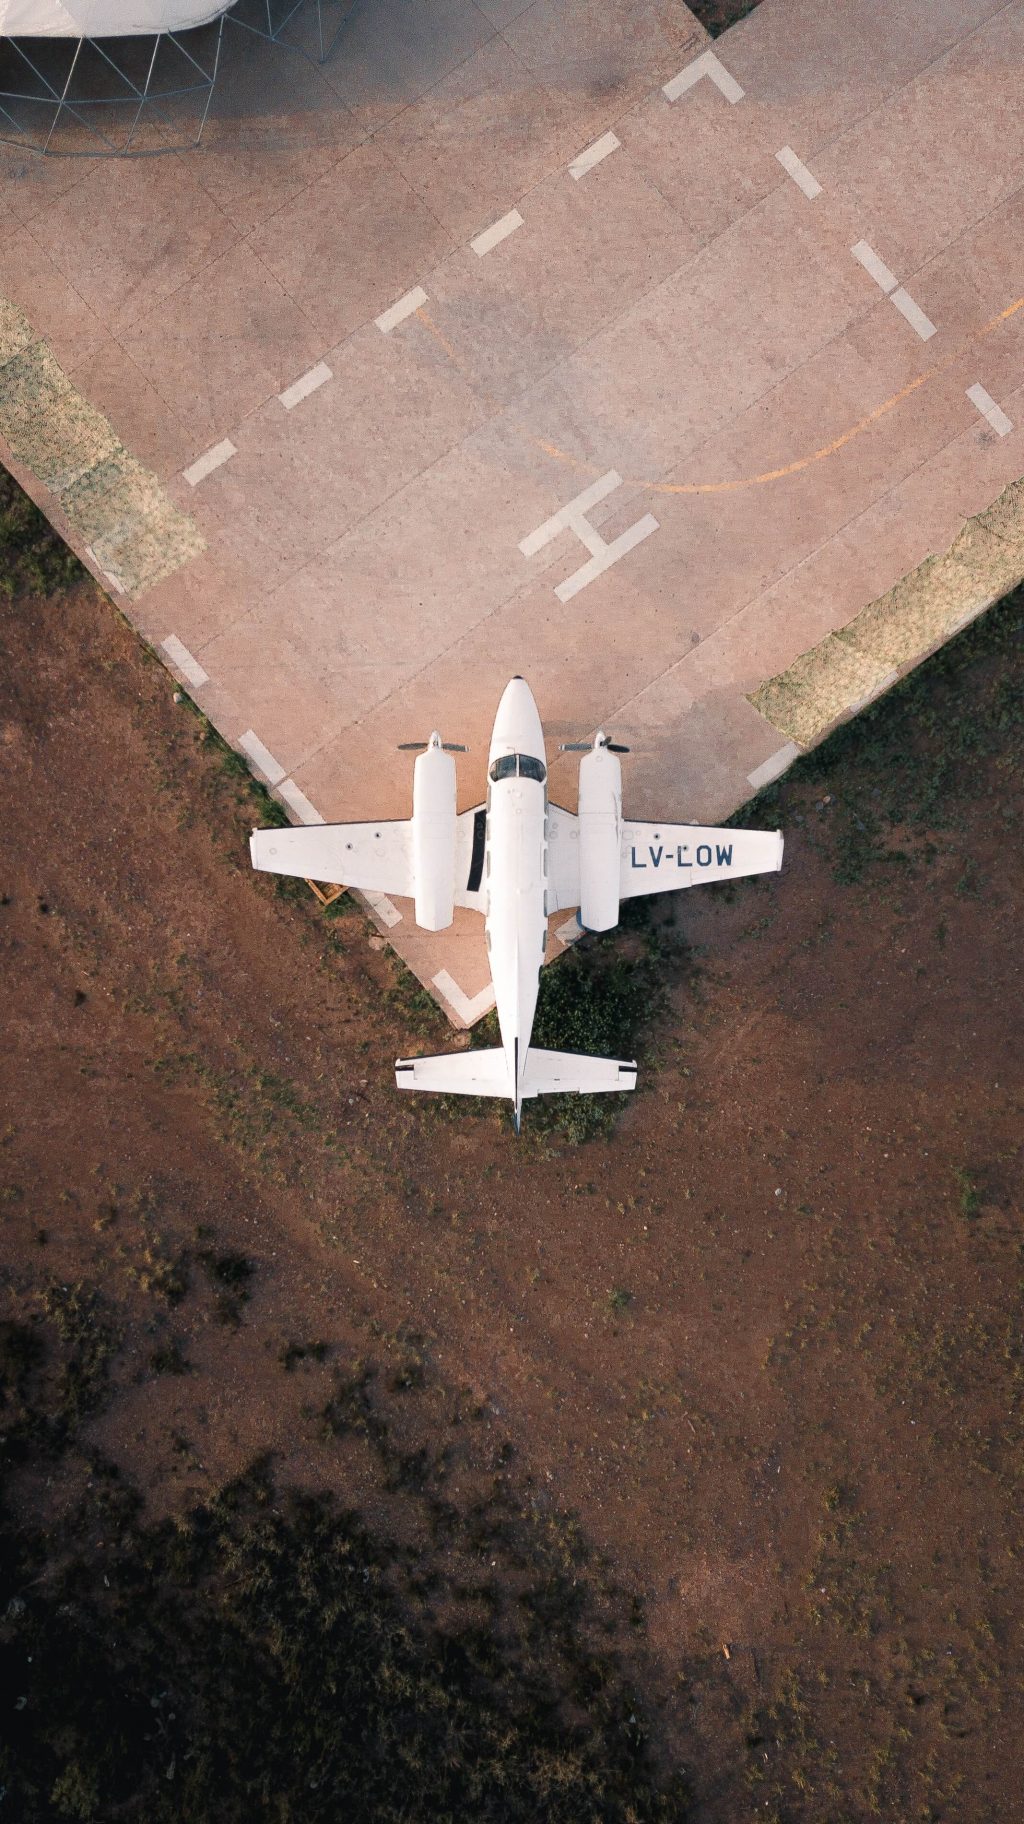 Aerial view of a jet